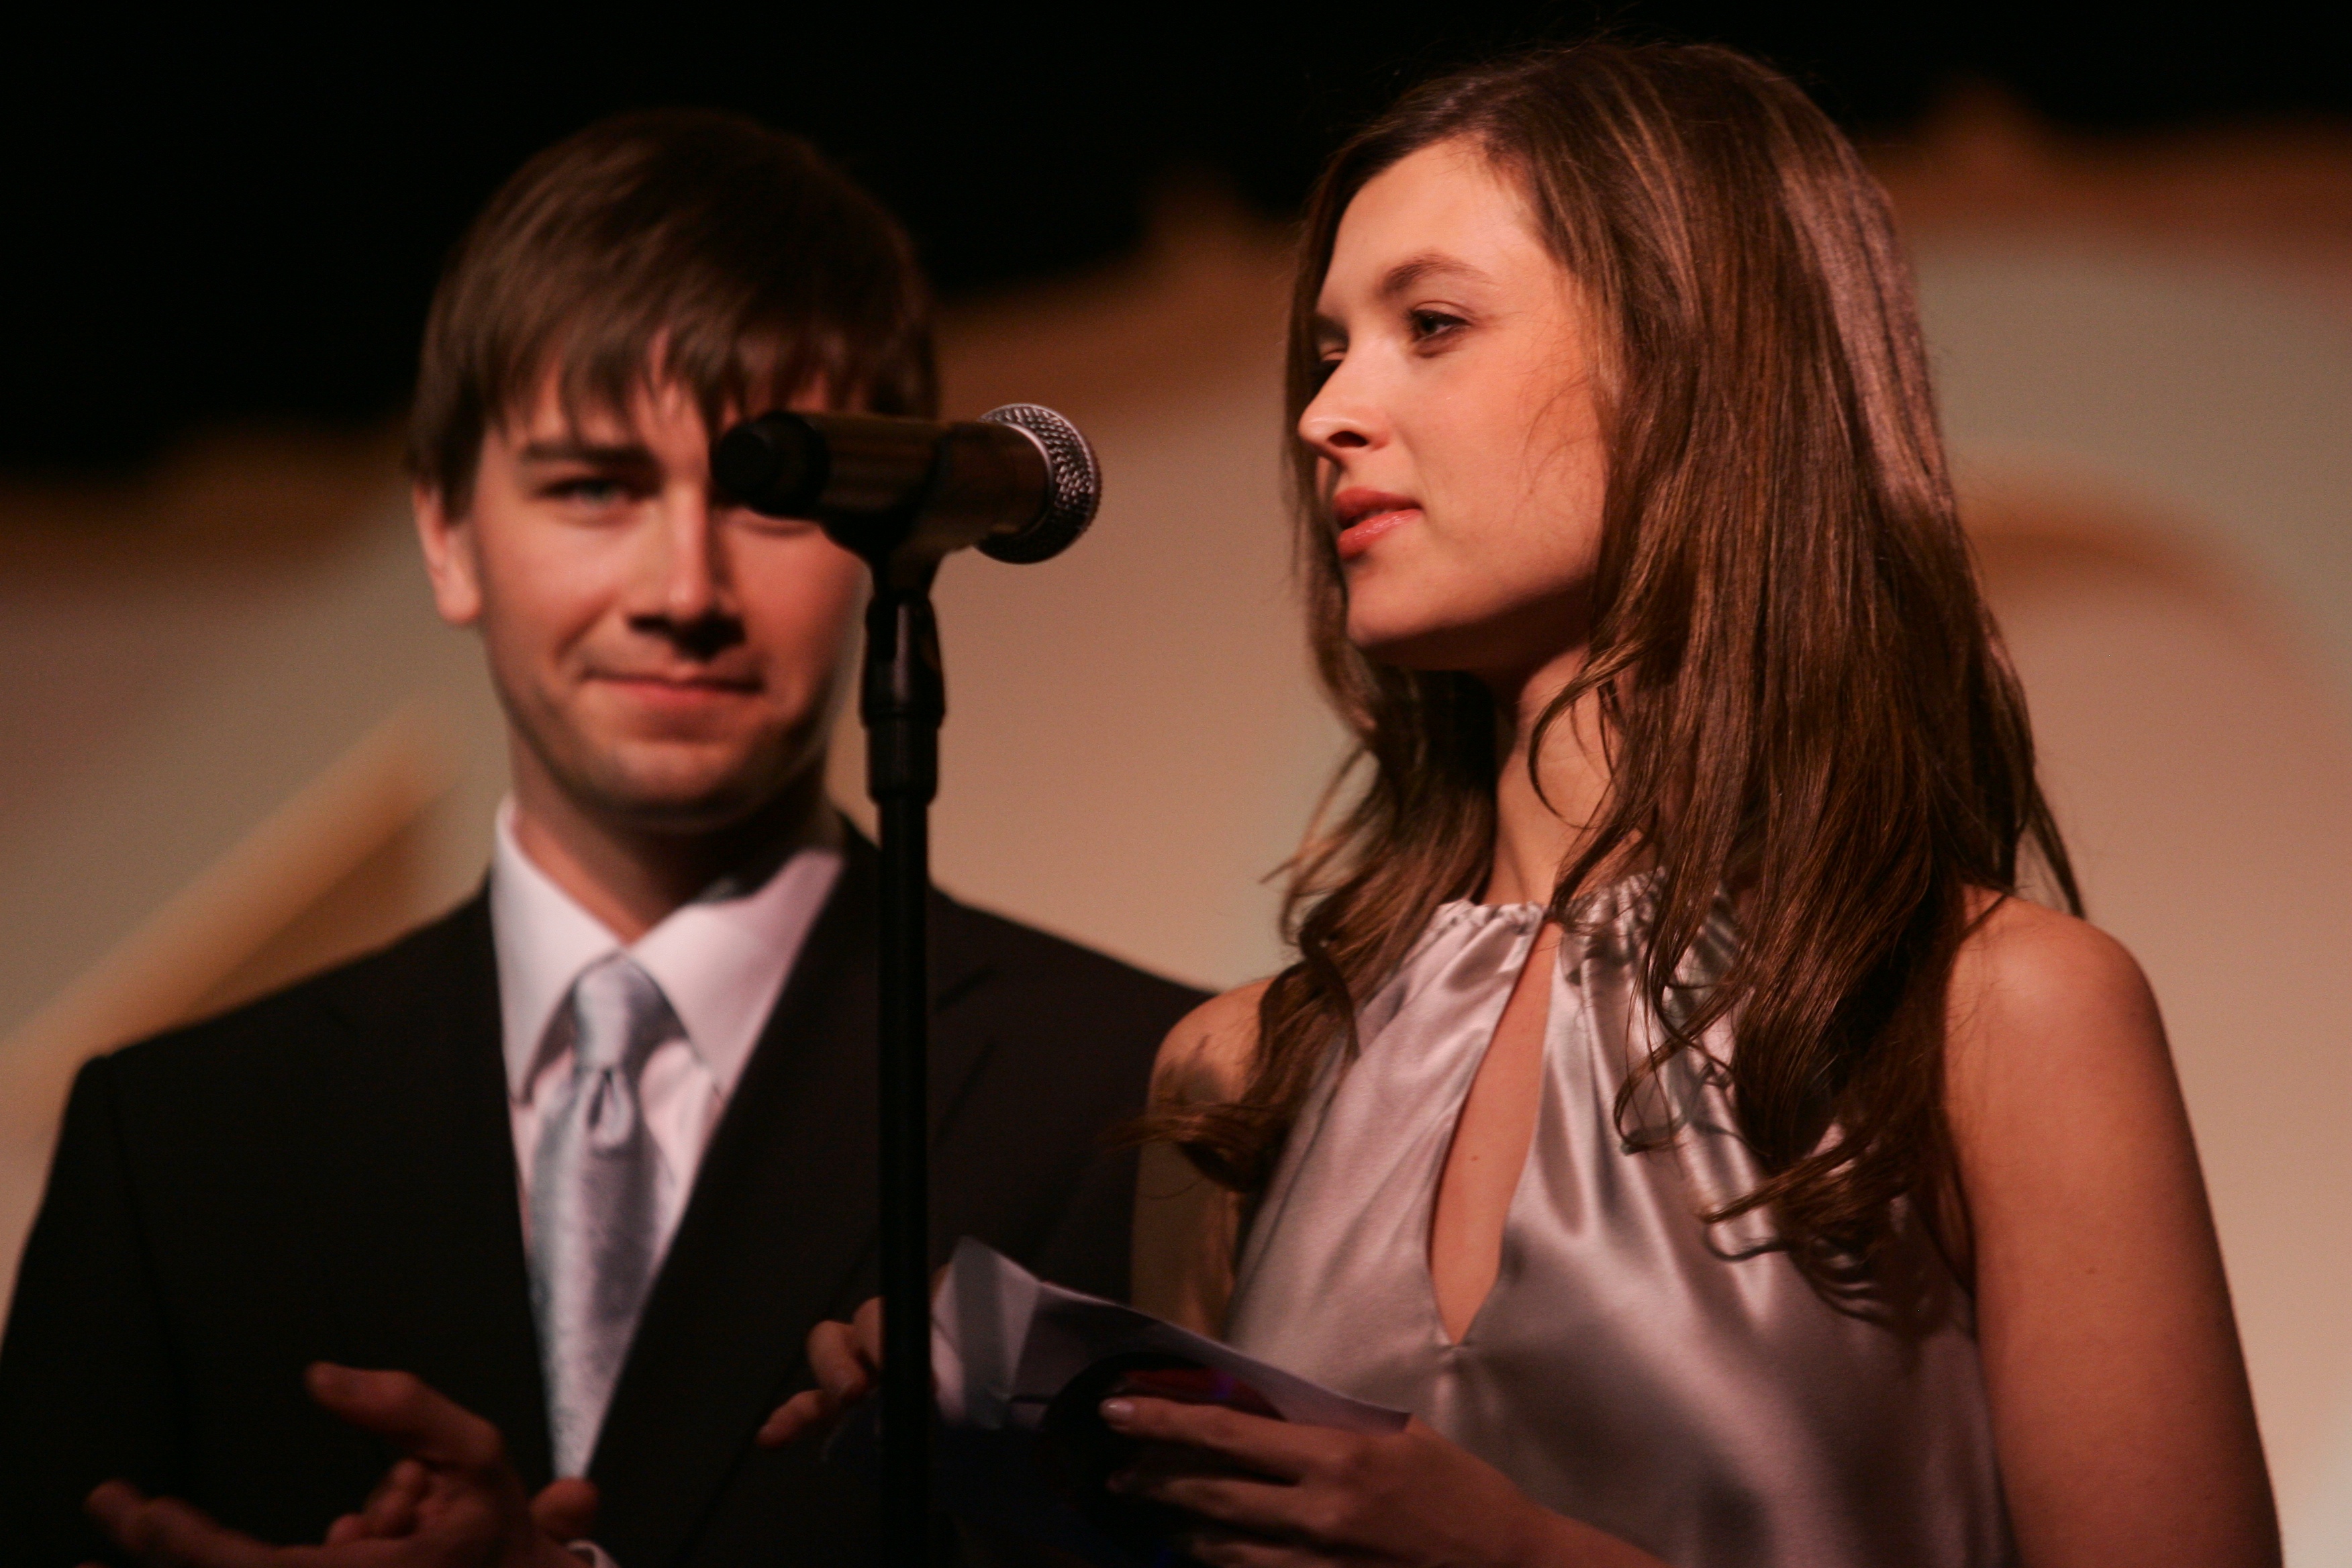 Torrance Coombs and Julie Patzwald present at the Leo Awards, 2008.